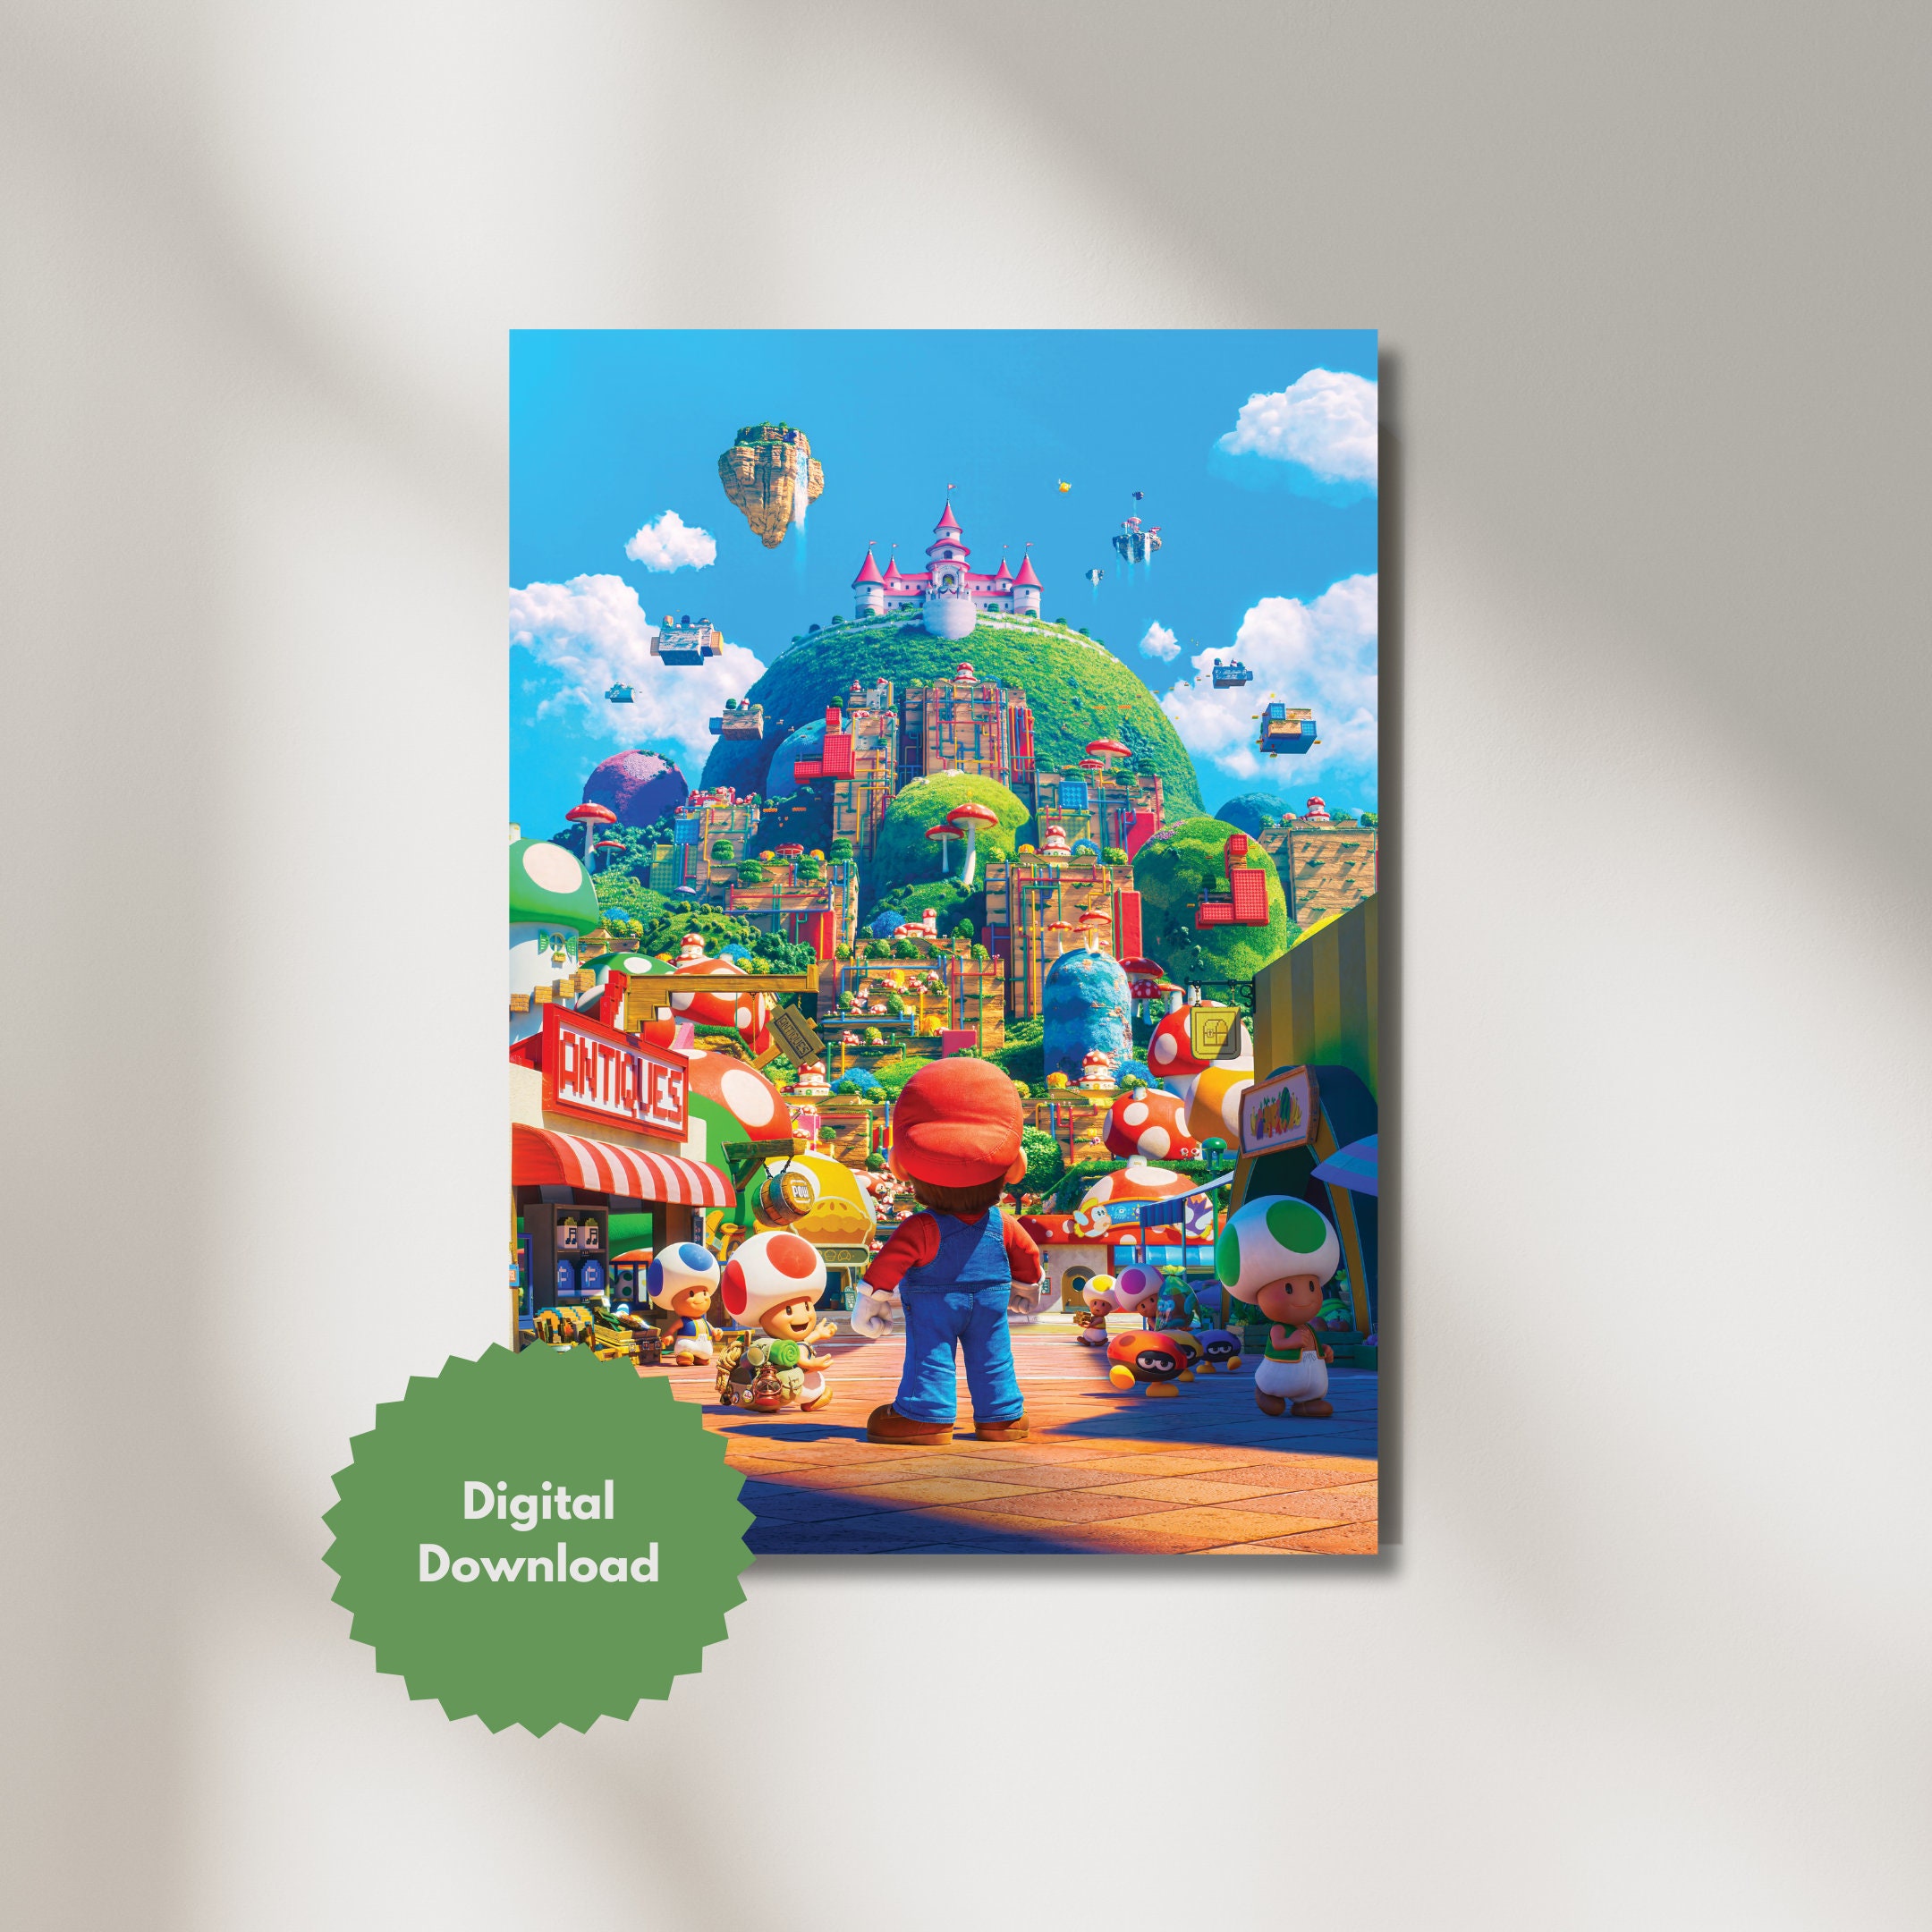 Petros Prints Mario poster set of 6-8x10 Mario Posters For Boys Room  Decorations, Mario Pictures Bedroom Decor for Boys, Mario Wall Art.  UNFRAMED.